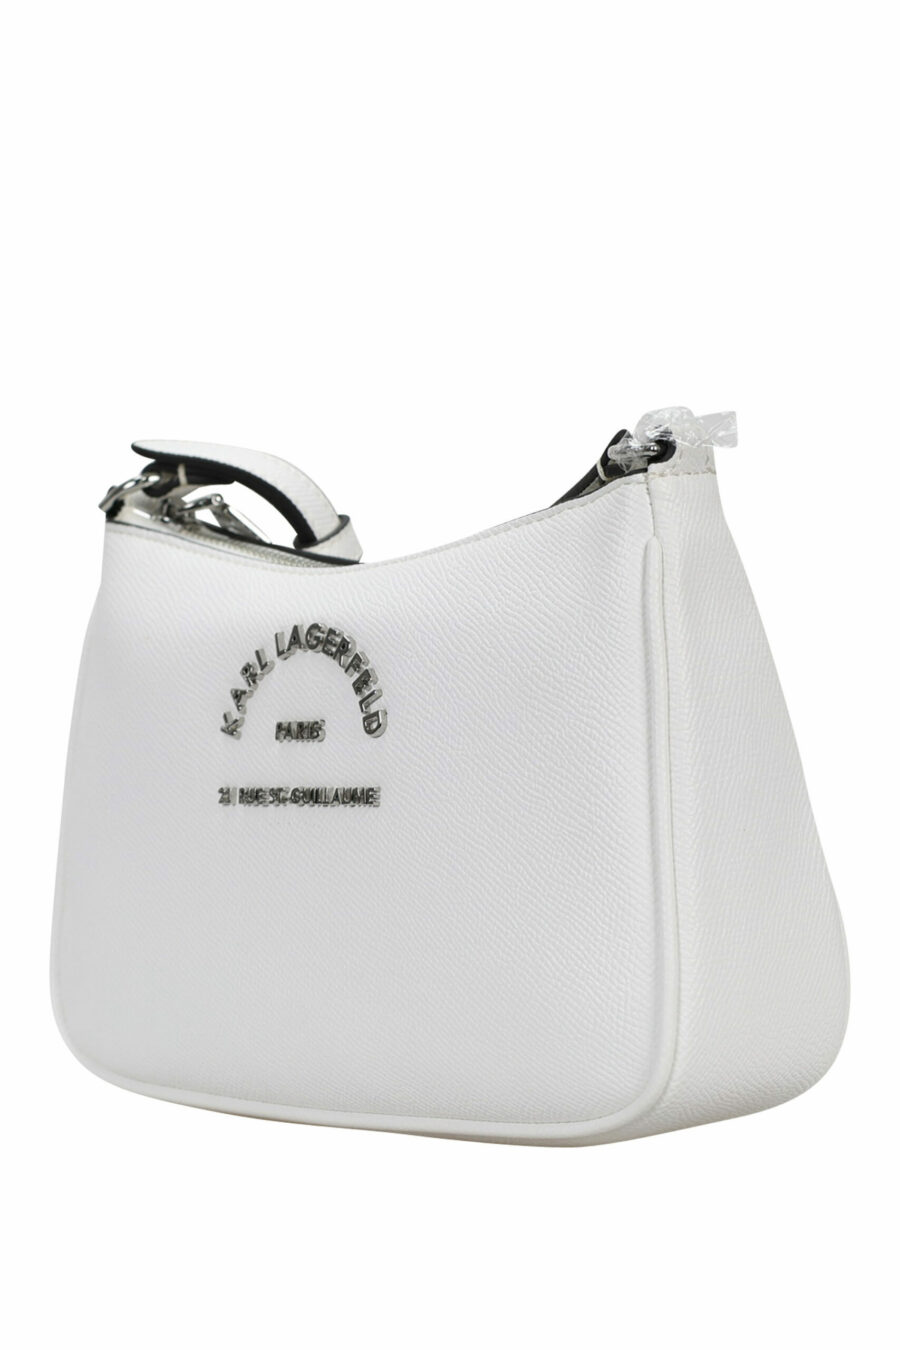 White shoulder bag with mini-logo "rue st guillaume" - 8720744417071 1 scaled